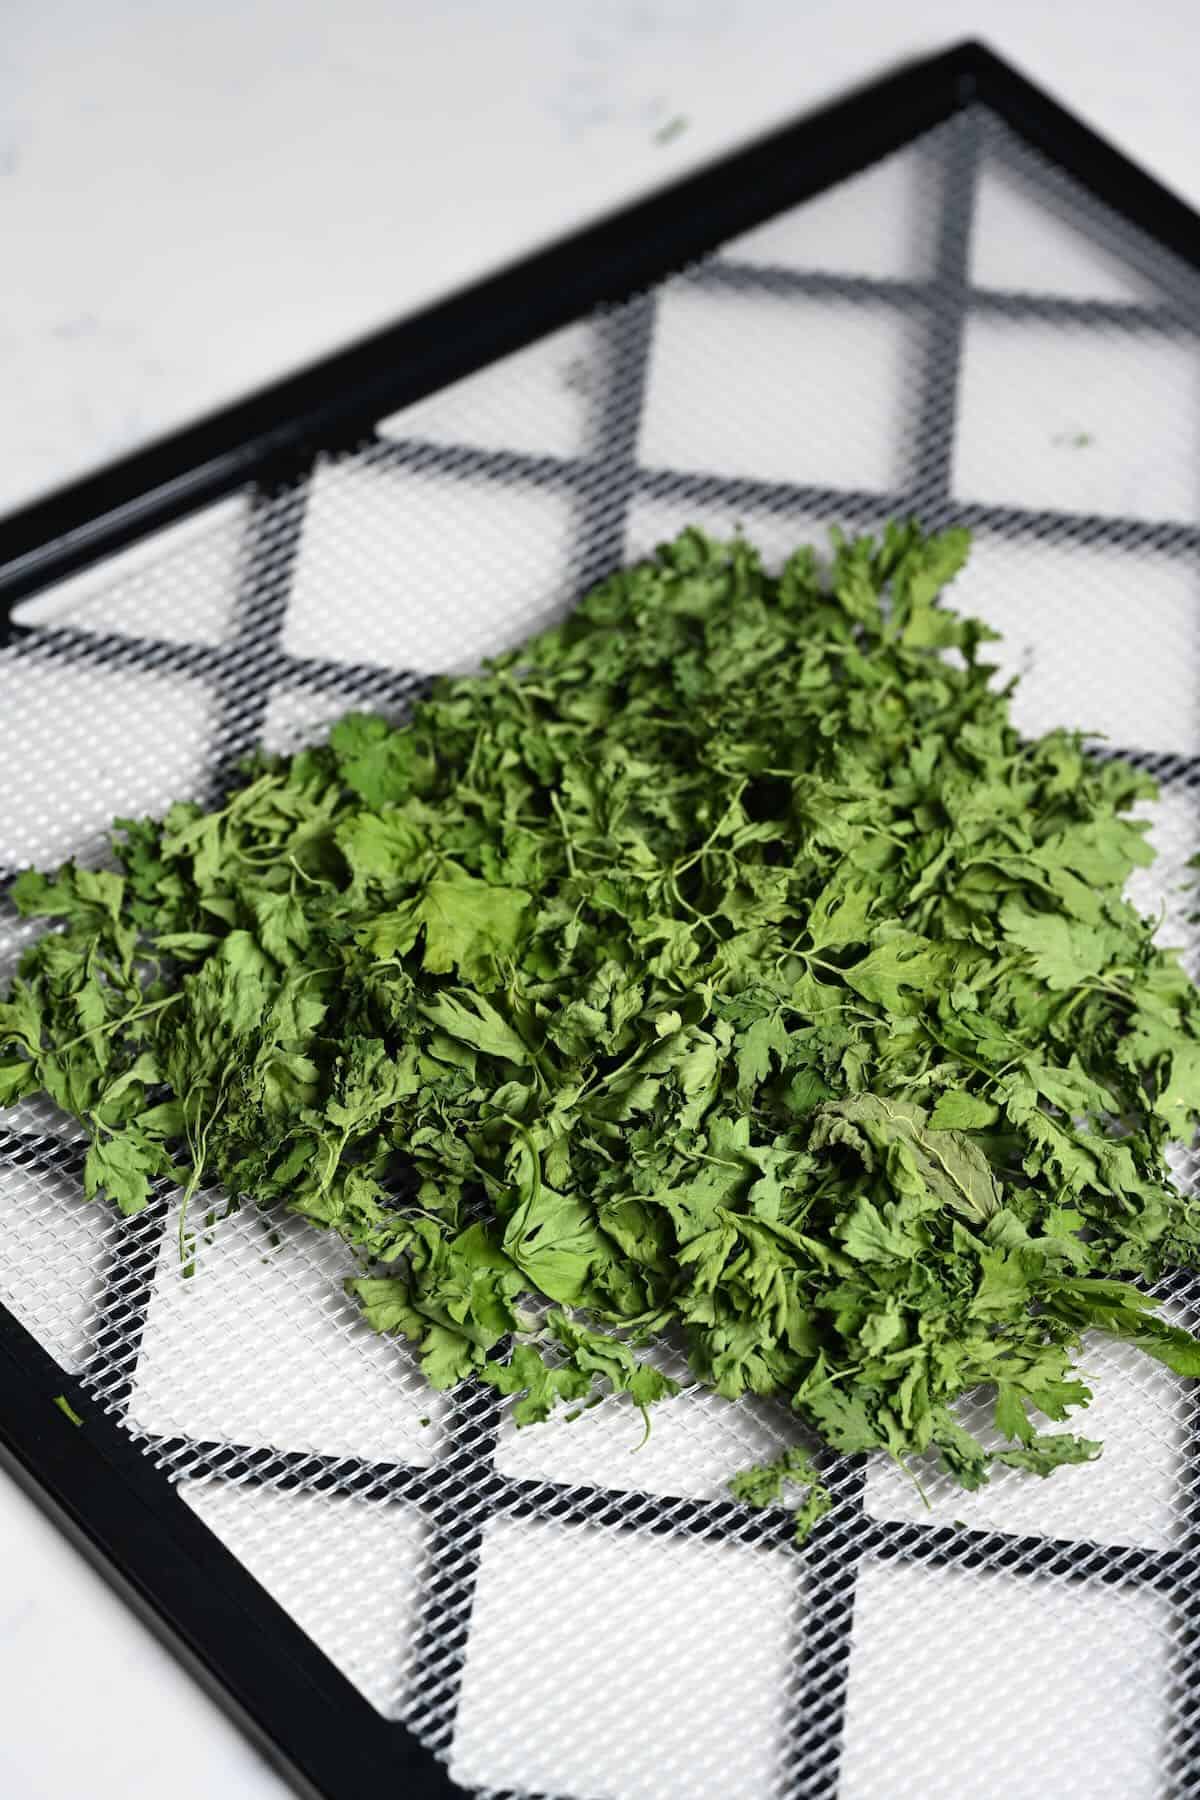 A tray with dried parsley